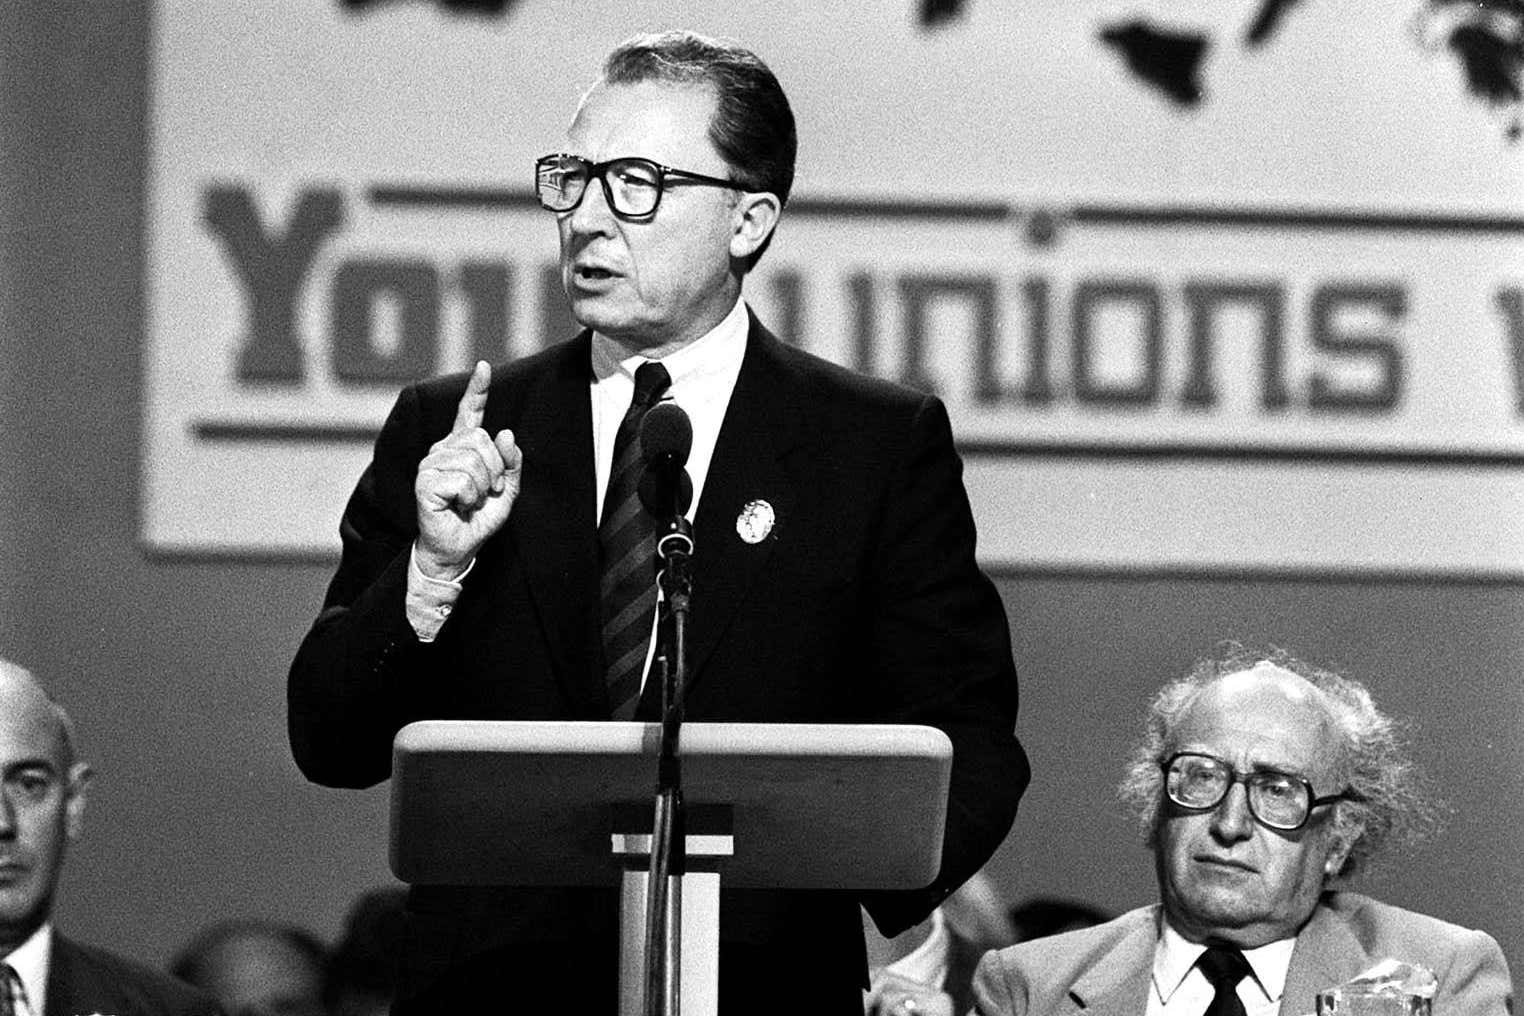 Jacques Delors was a leading figure on the French left